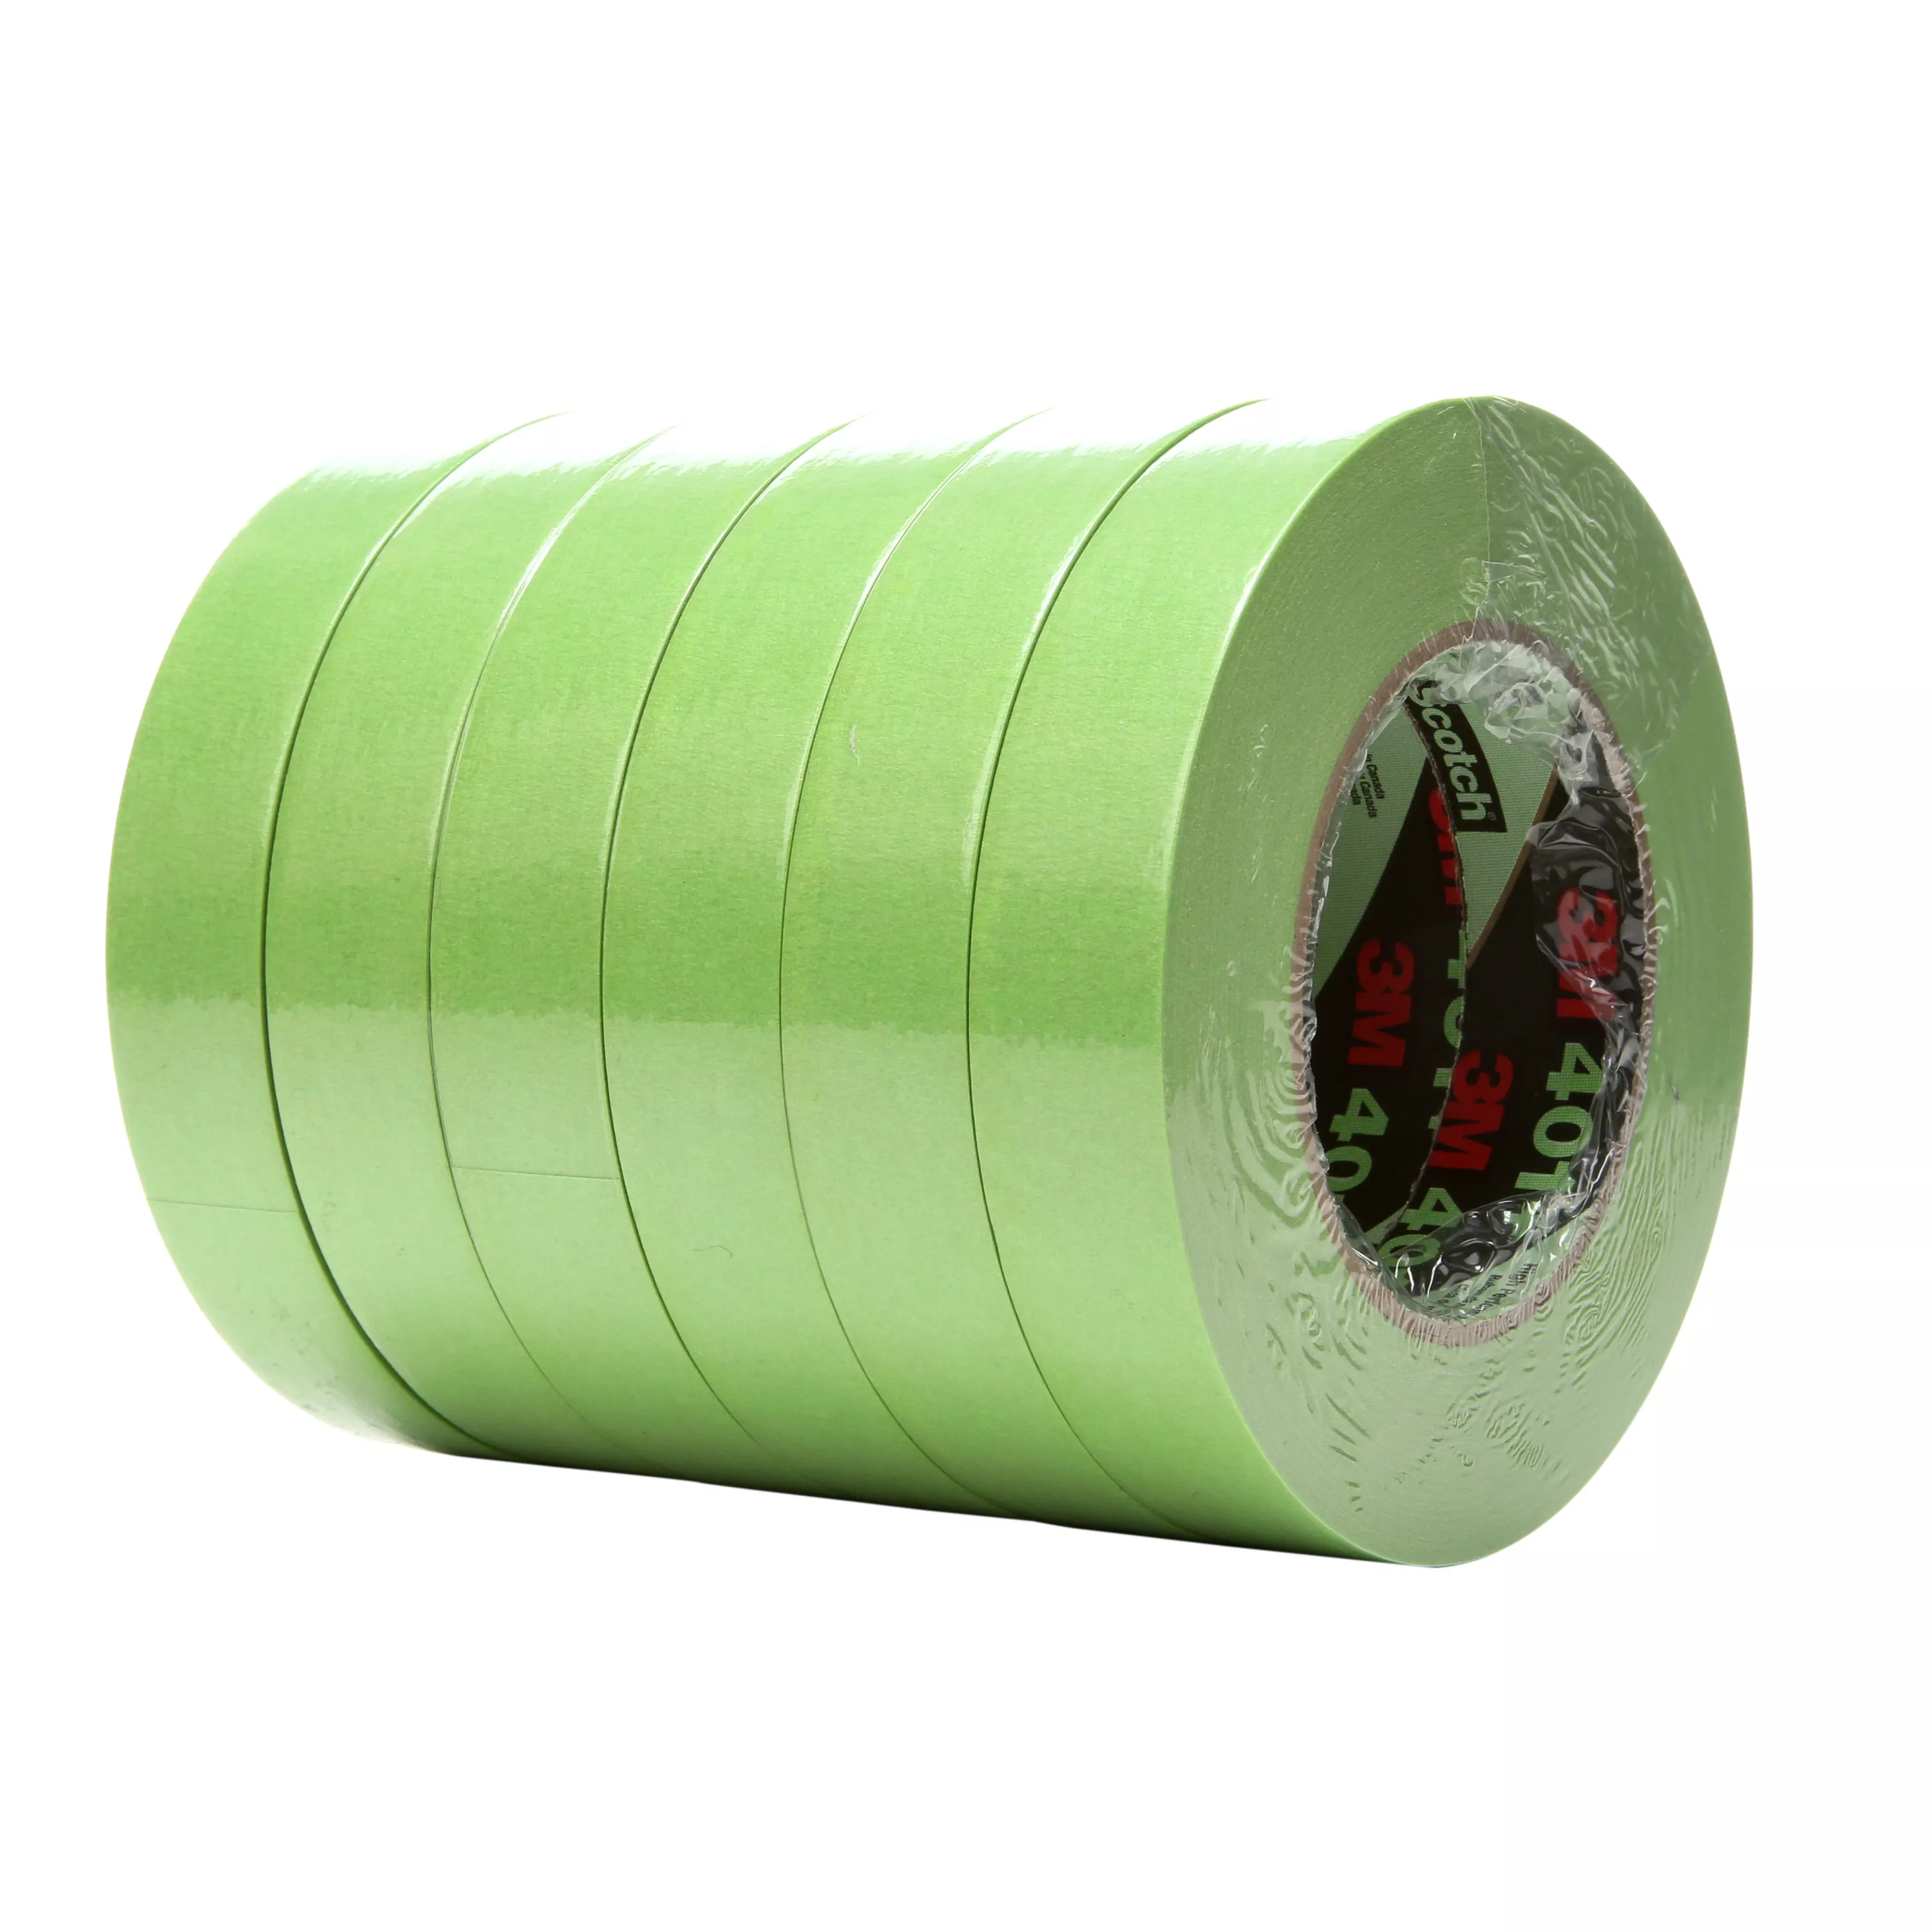 Product Number 401+ | 3M™ High Performance Green Masking Tape 401+